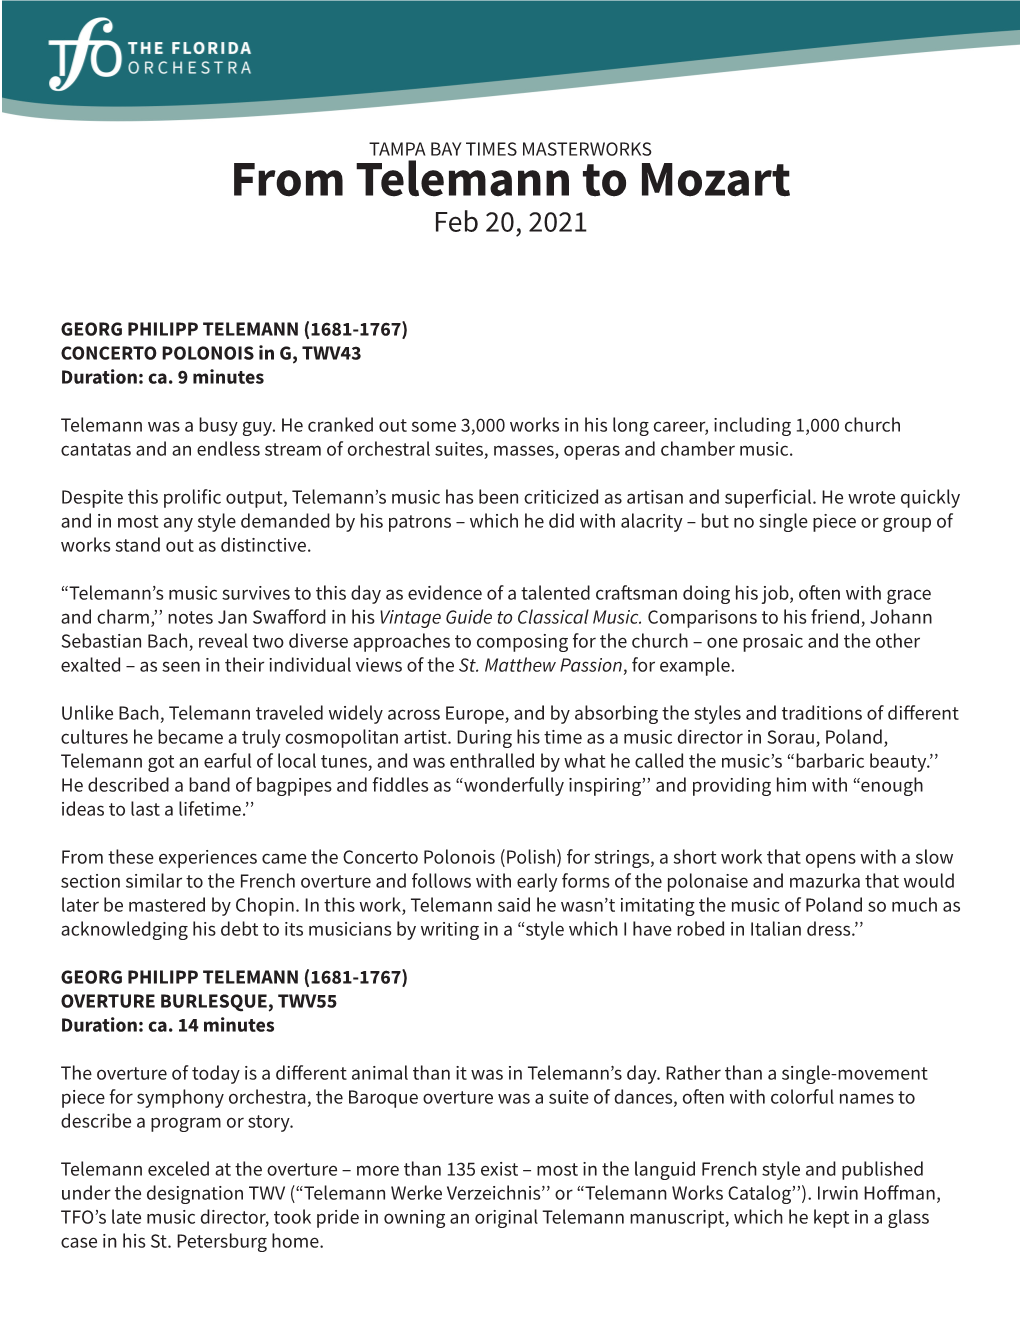 From Telemann to Mozart Feb 20, 2021